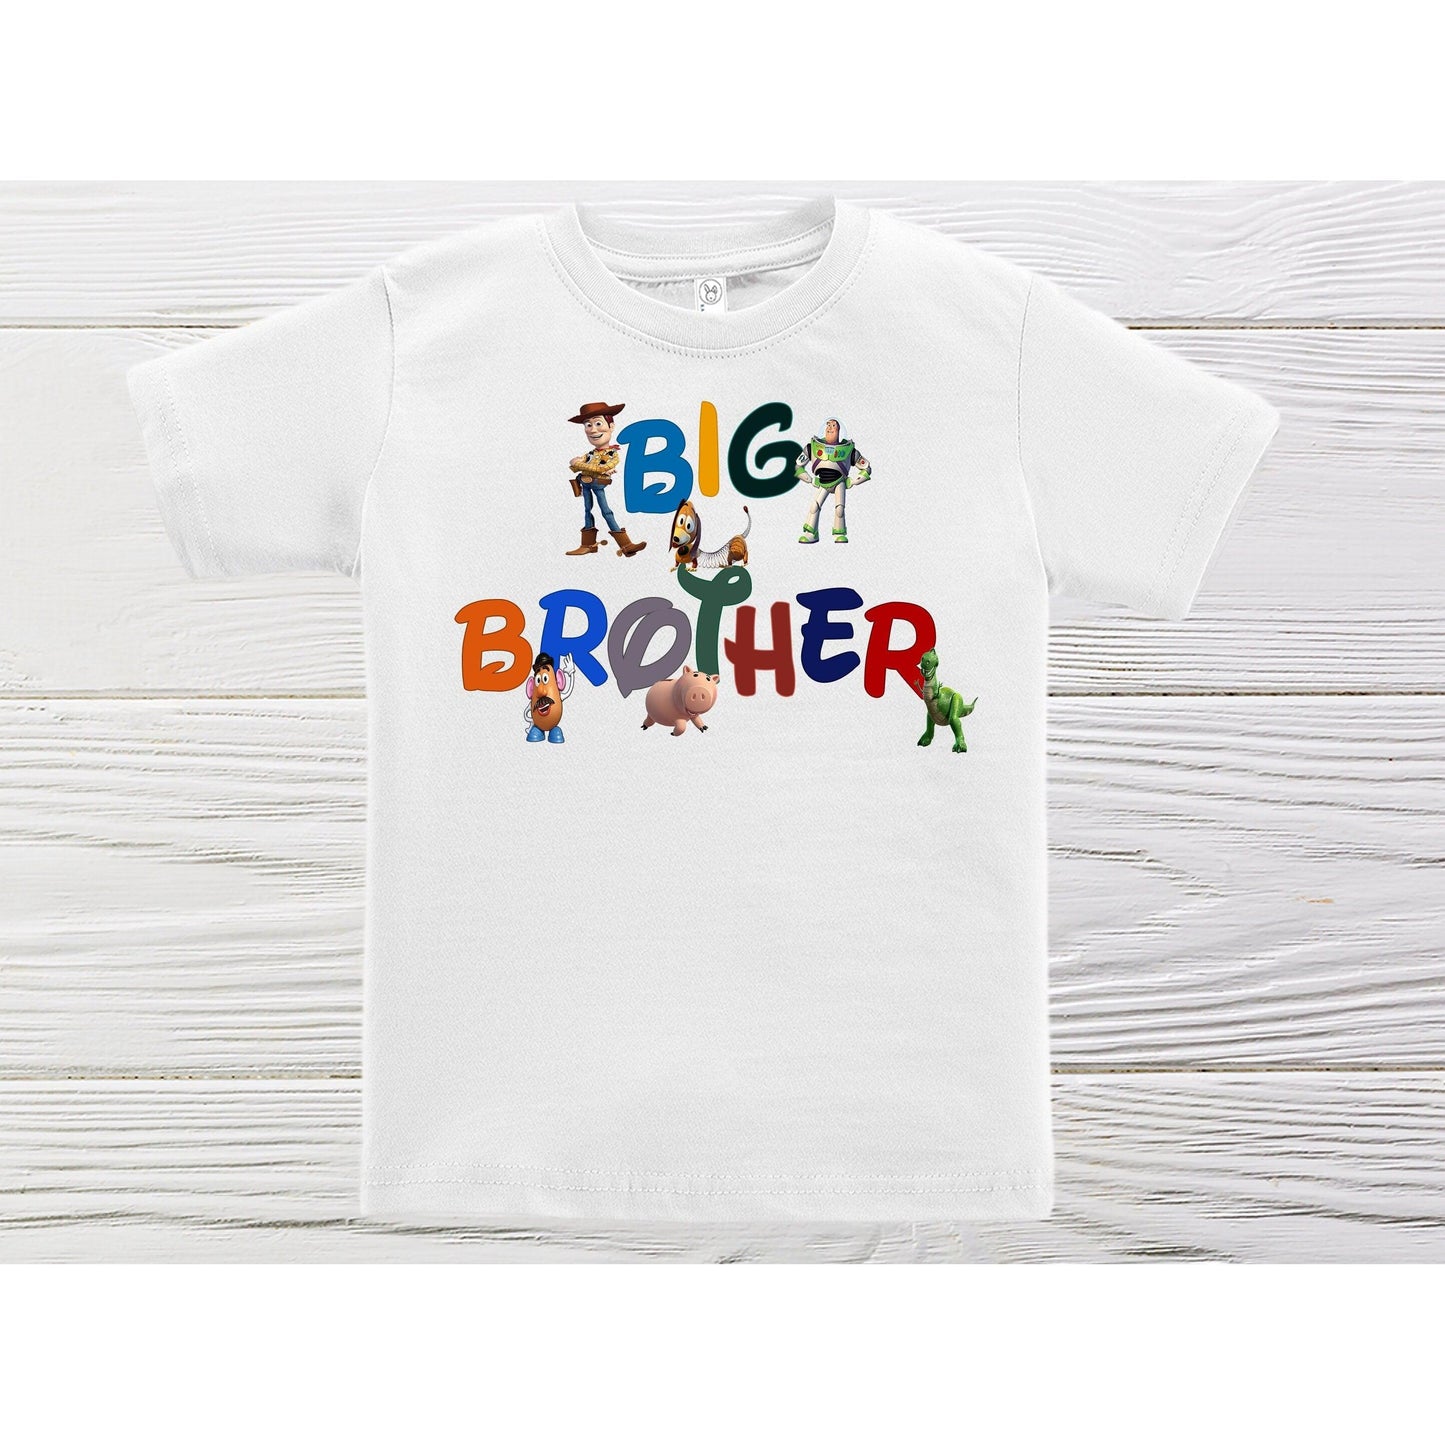 Big brother shirt  Toy Story 